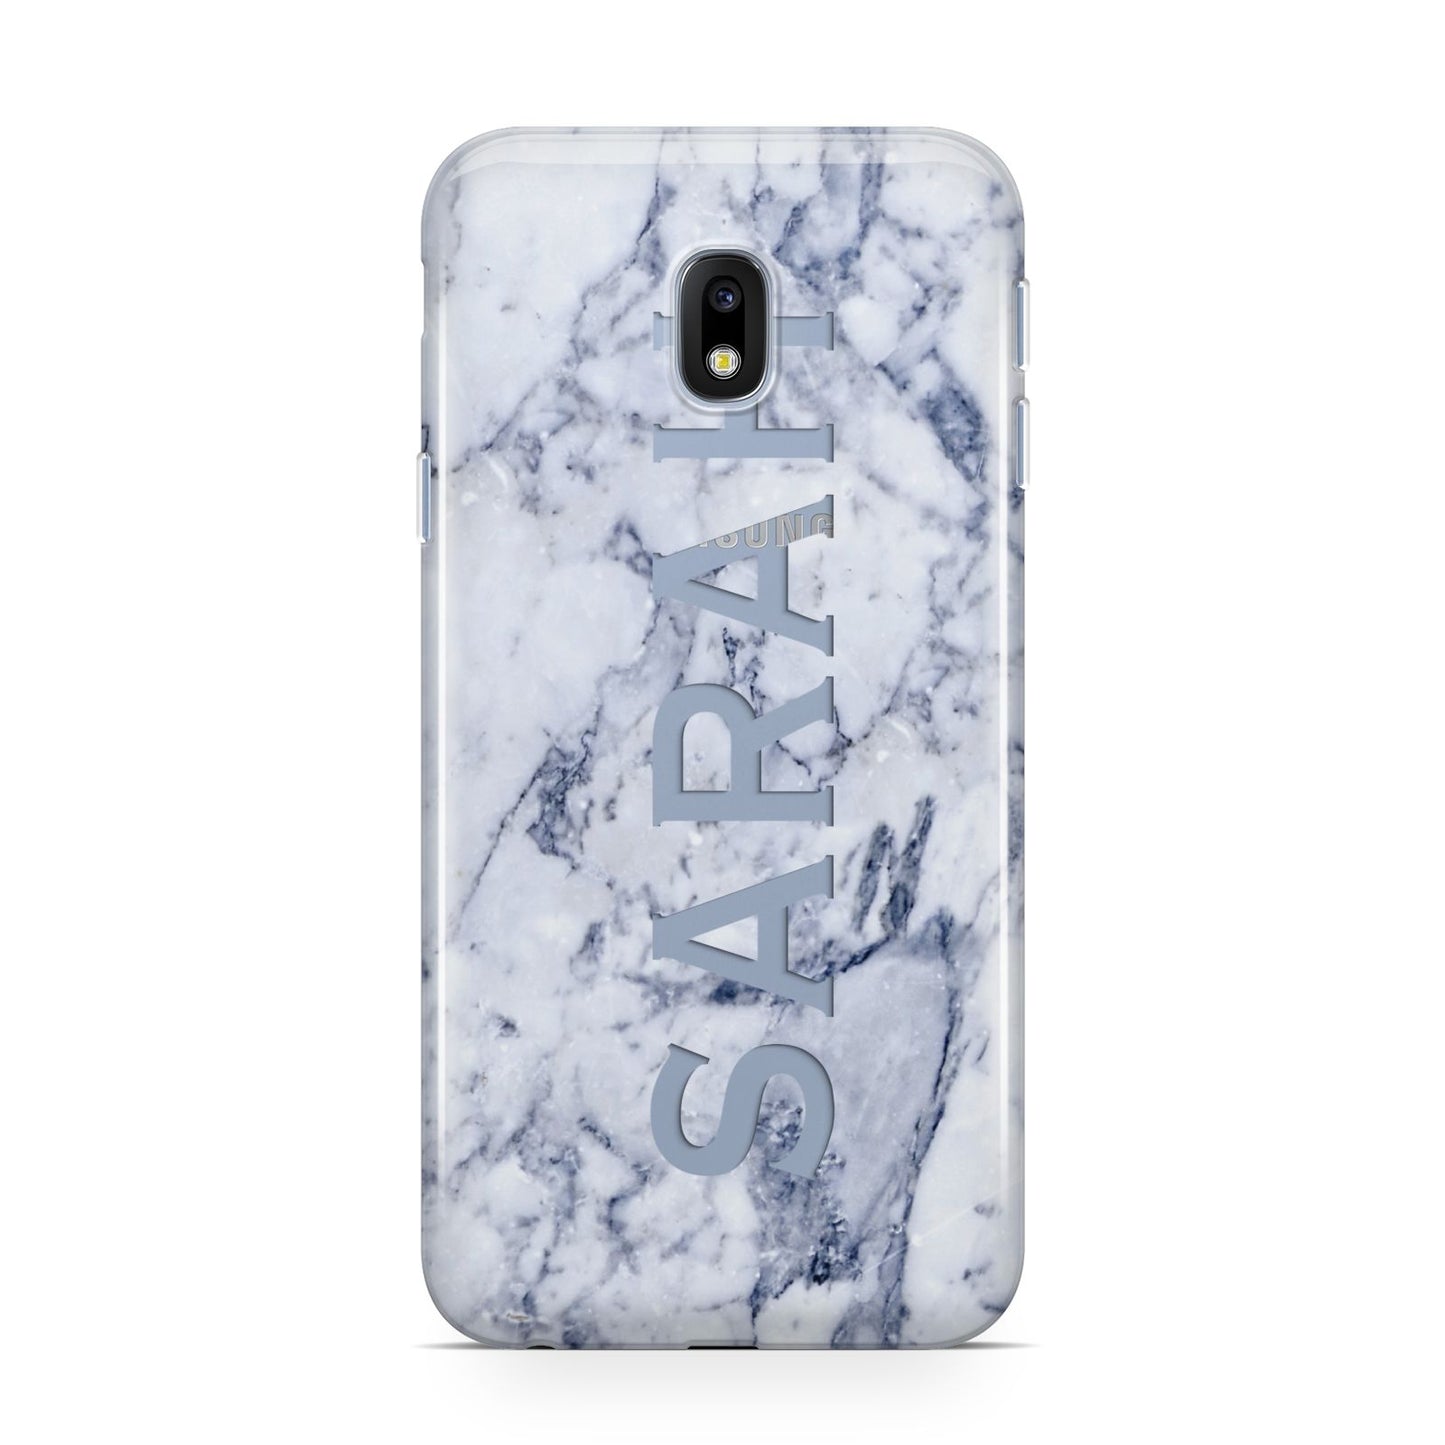 Personalised Clear Name Cutout Blue Marble Custom Samsung Galaxy J3 2017 Case